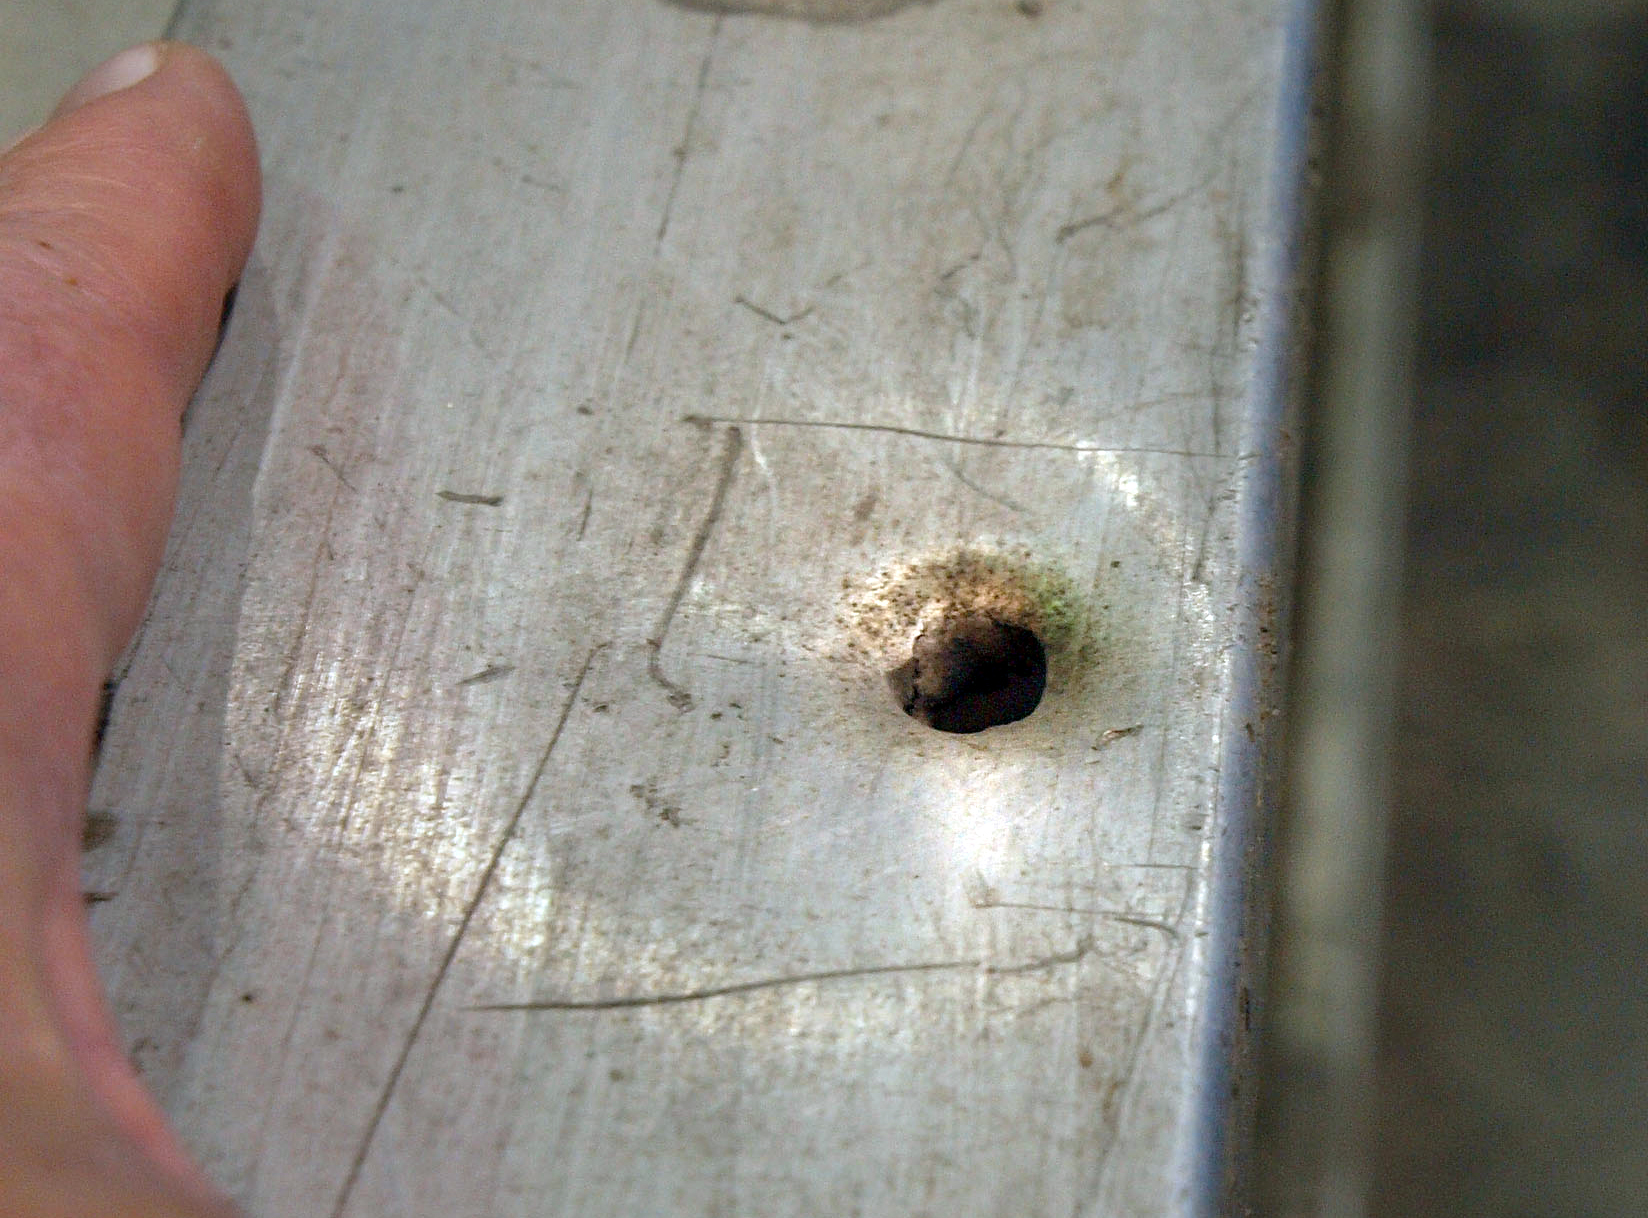 Bullet hole found on a ground ladder for Detroit firefighters. By Steve Neavling. 